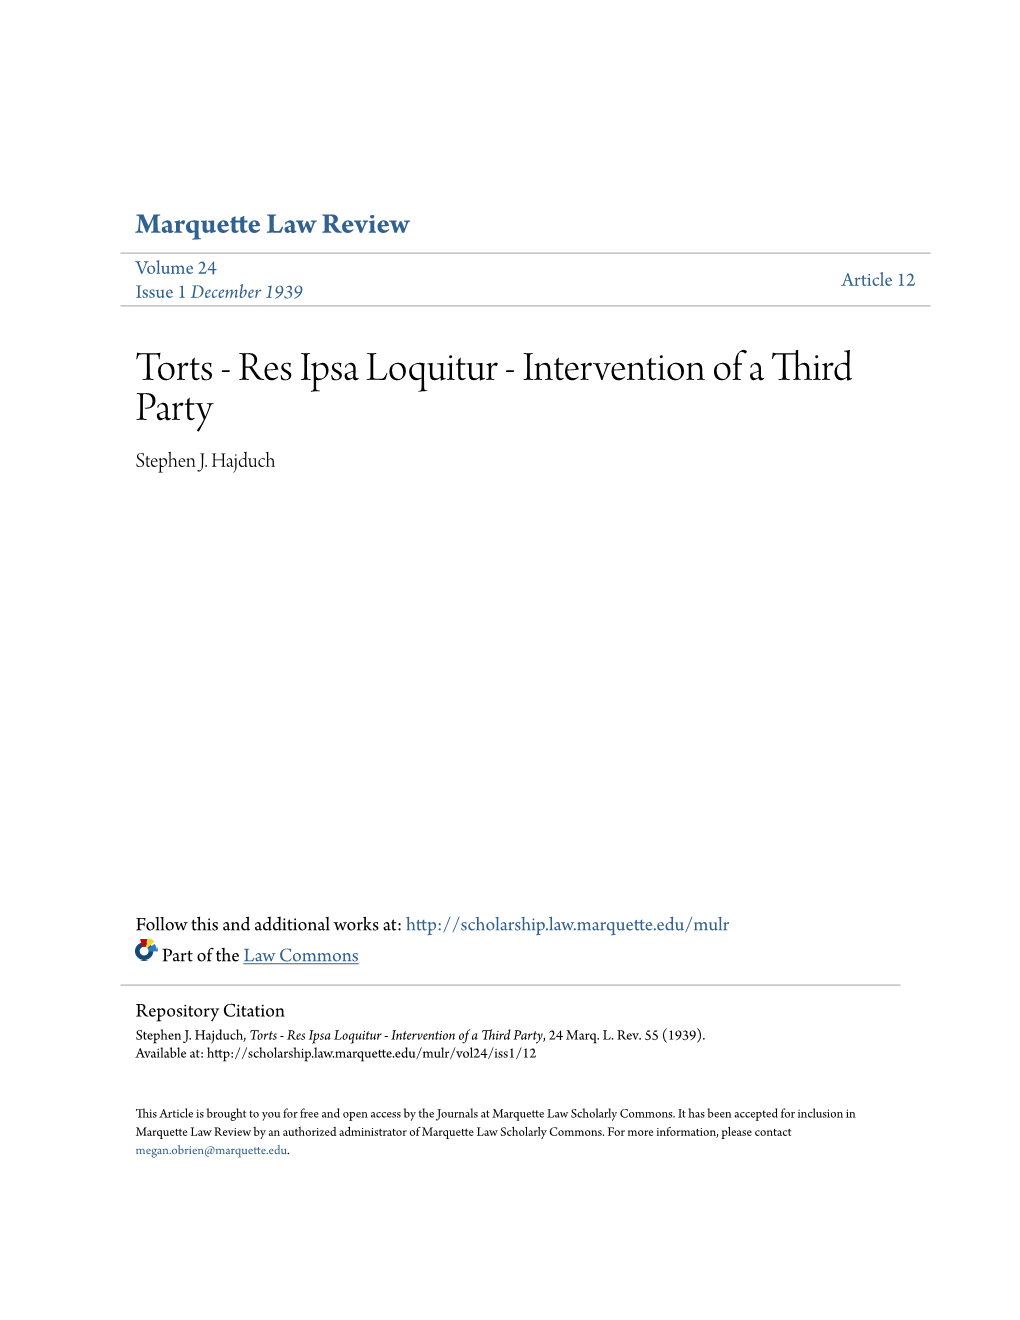 Torts - Res Ipsa Loquitur - Intervention of a Third Party Stephen J